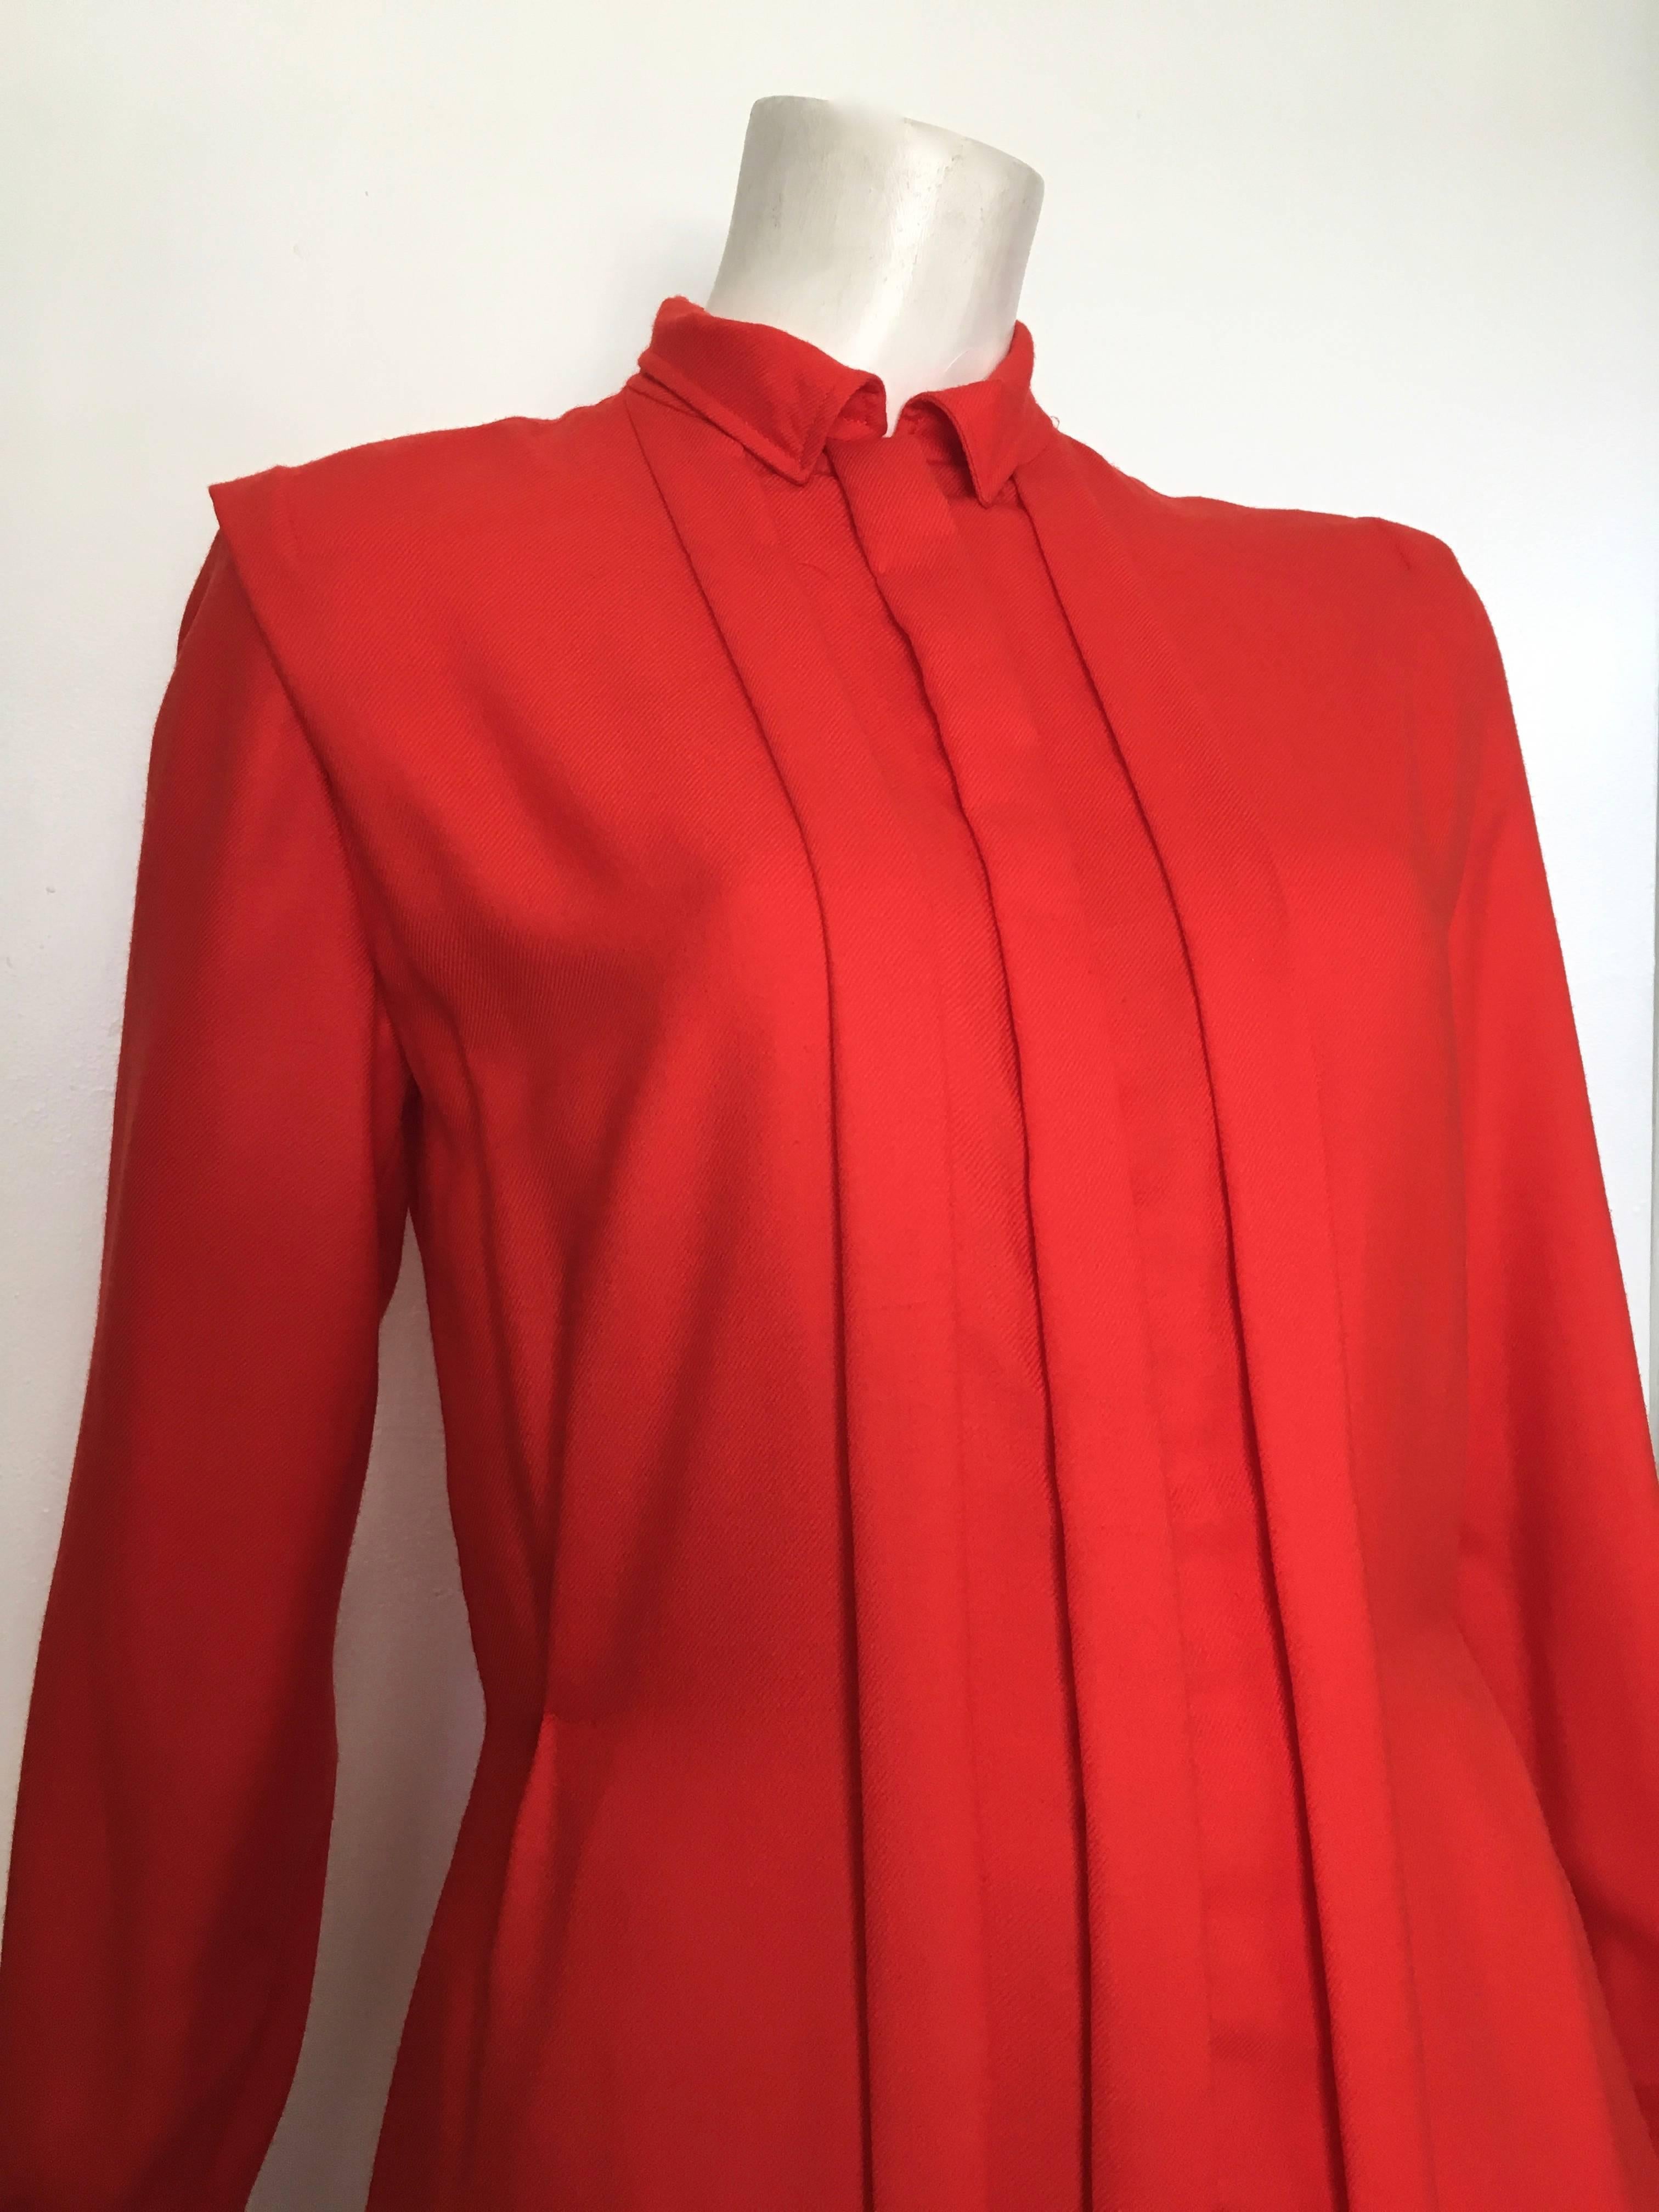 Courreges Red Wool Long Sleeve Dress with Pockets, 1980s  For Sale 7